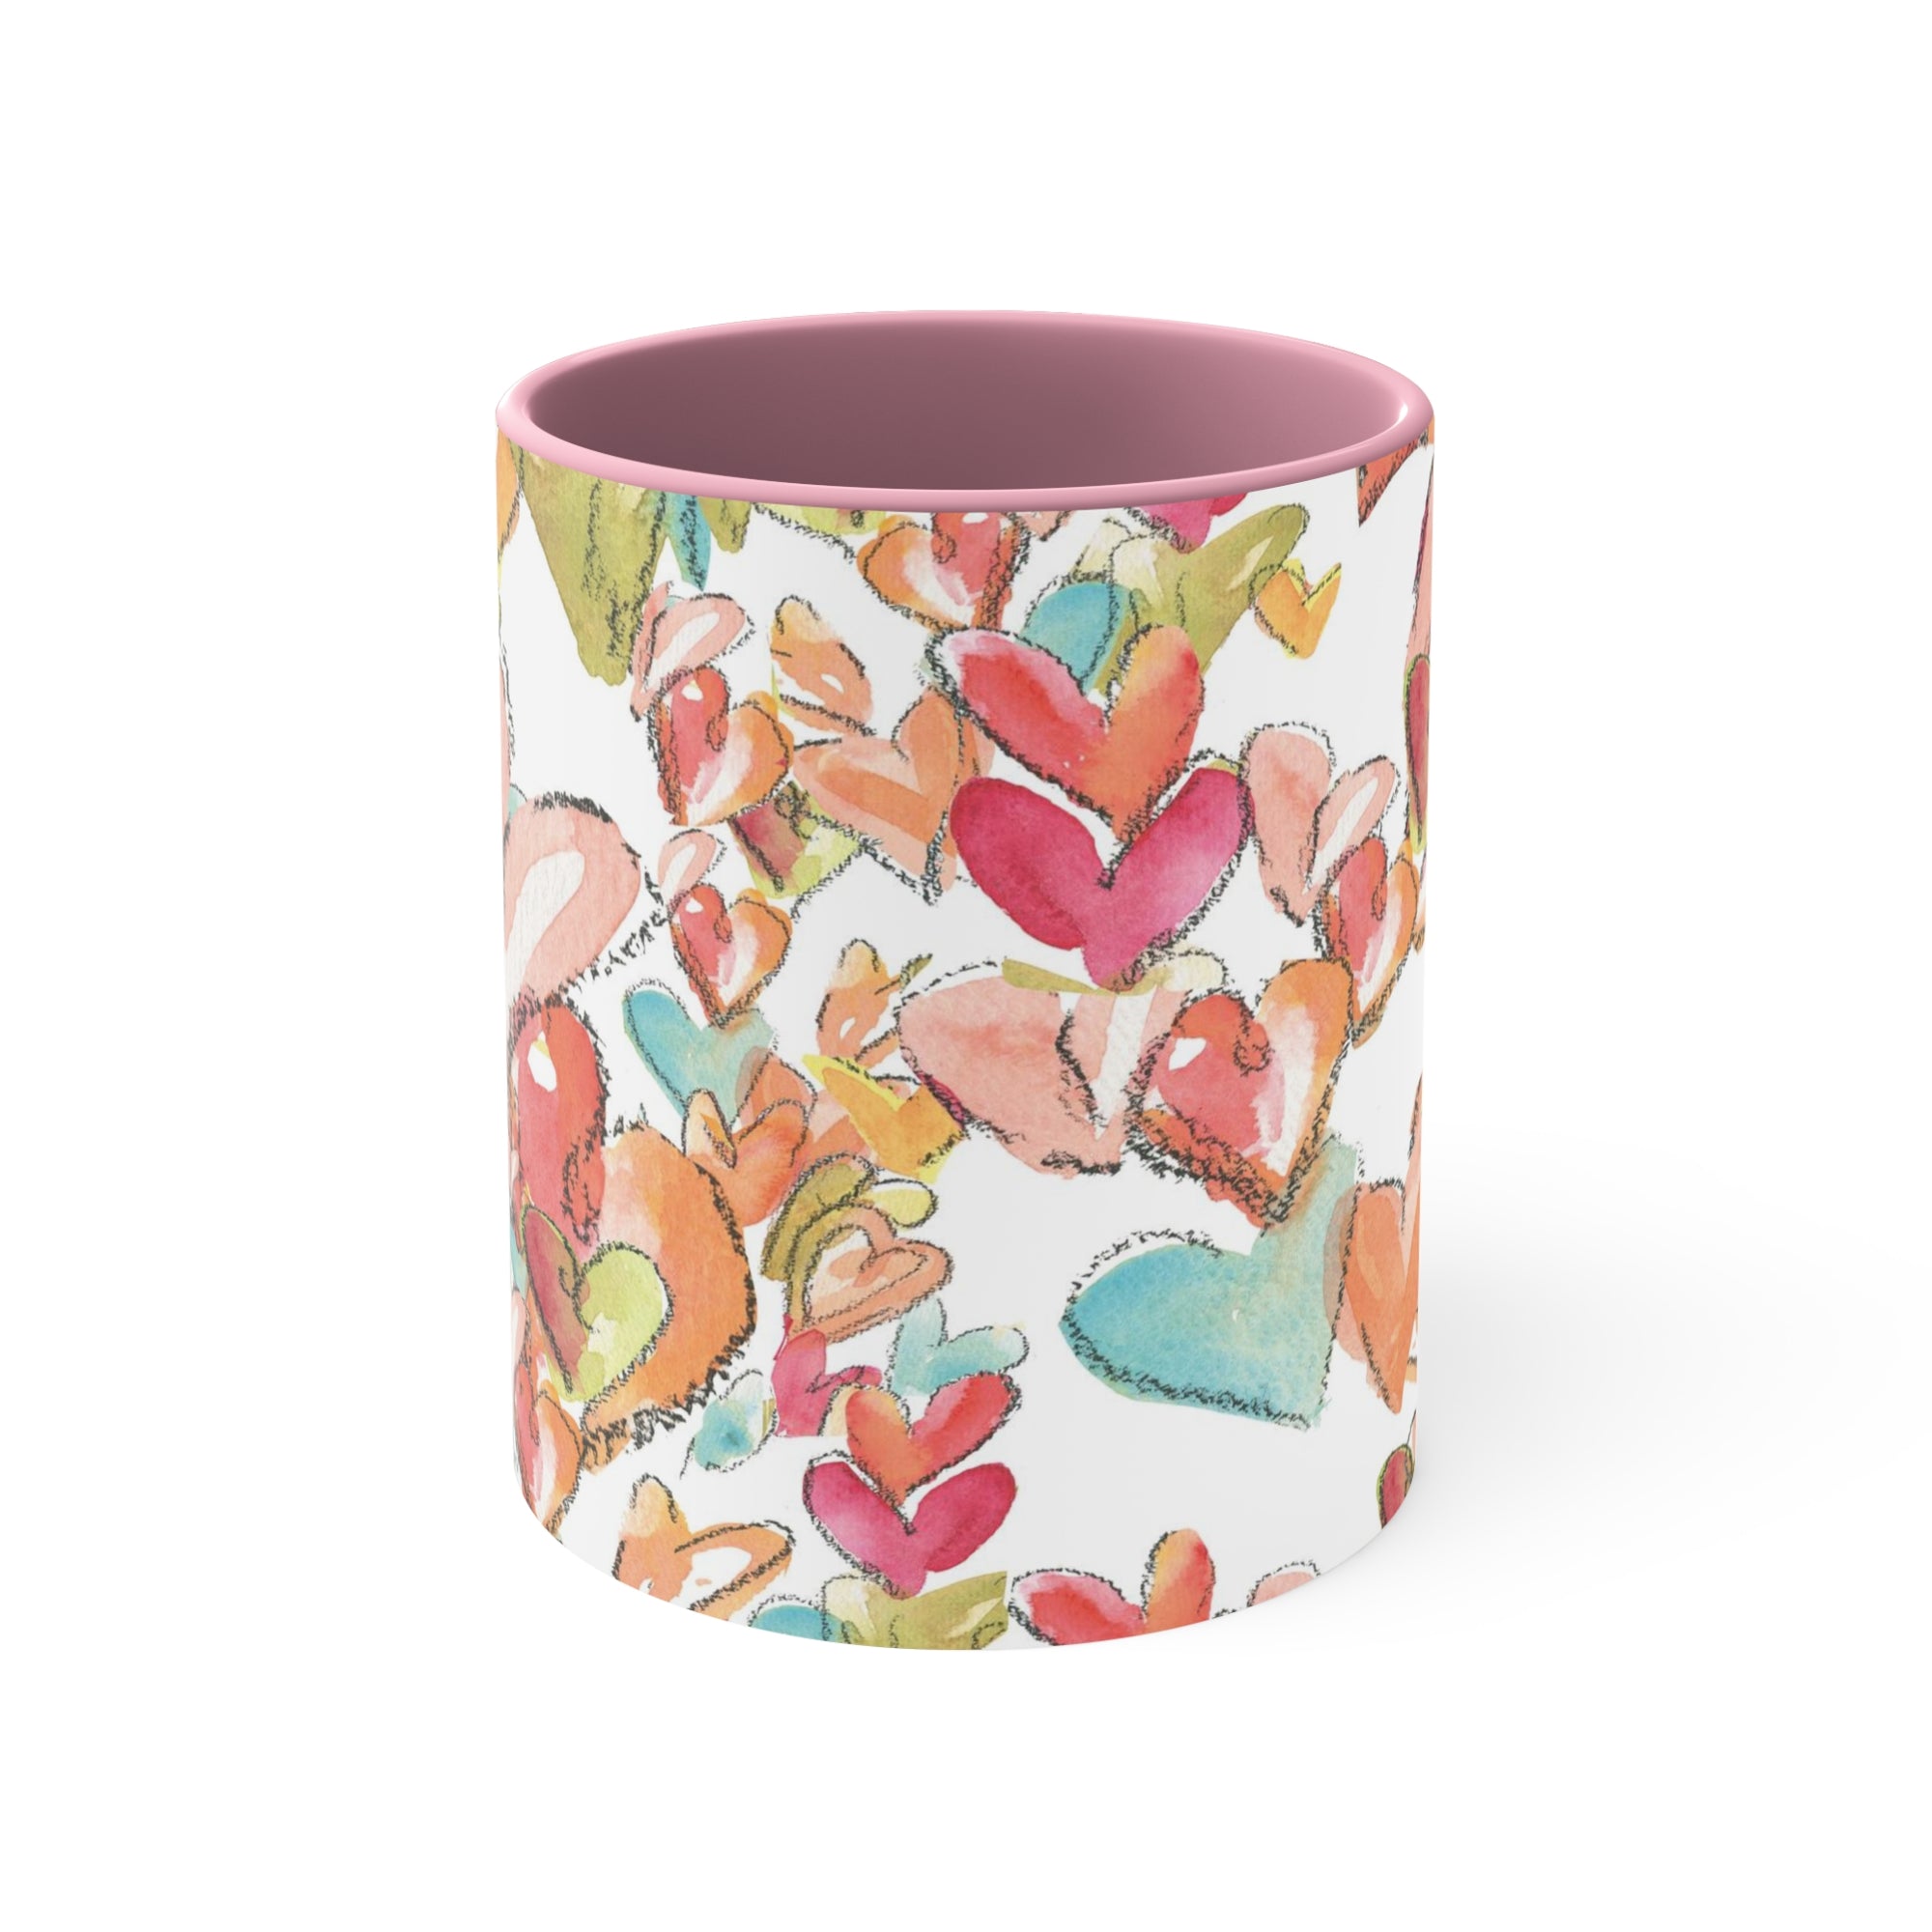 Valentine Accent Coffee Mug, 11oz | Valentine Office Gift | Watercolor Hearts on Mugs